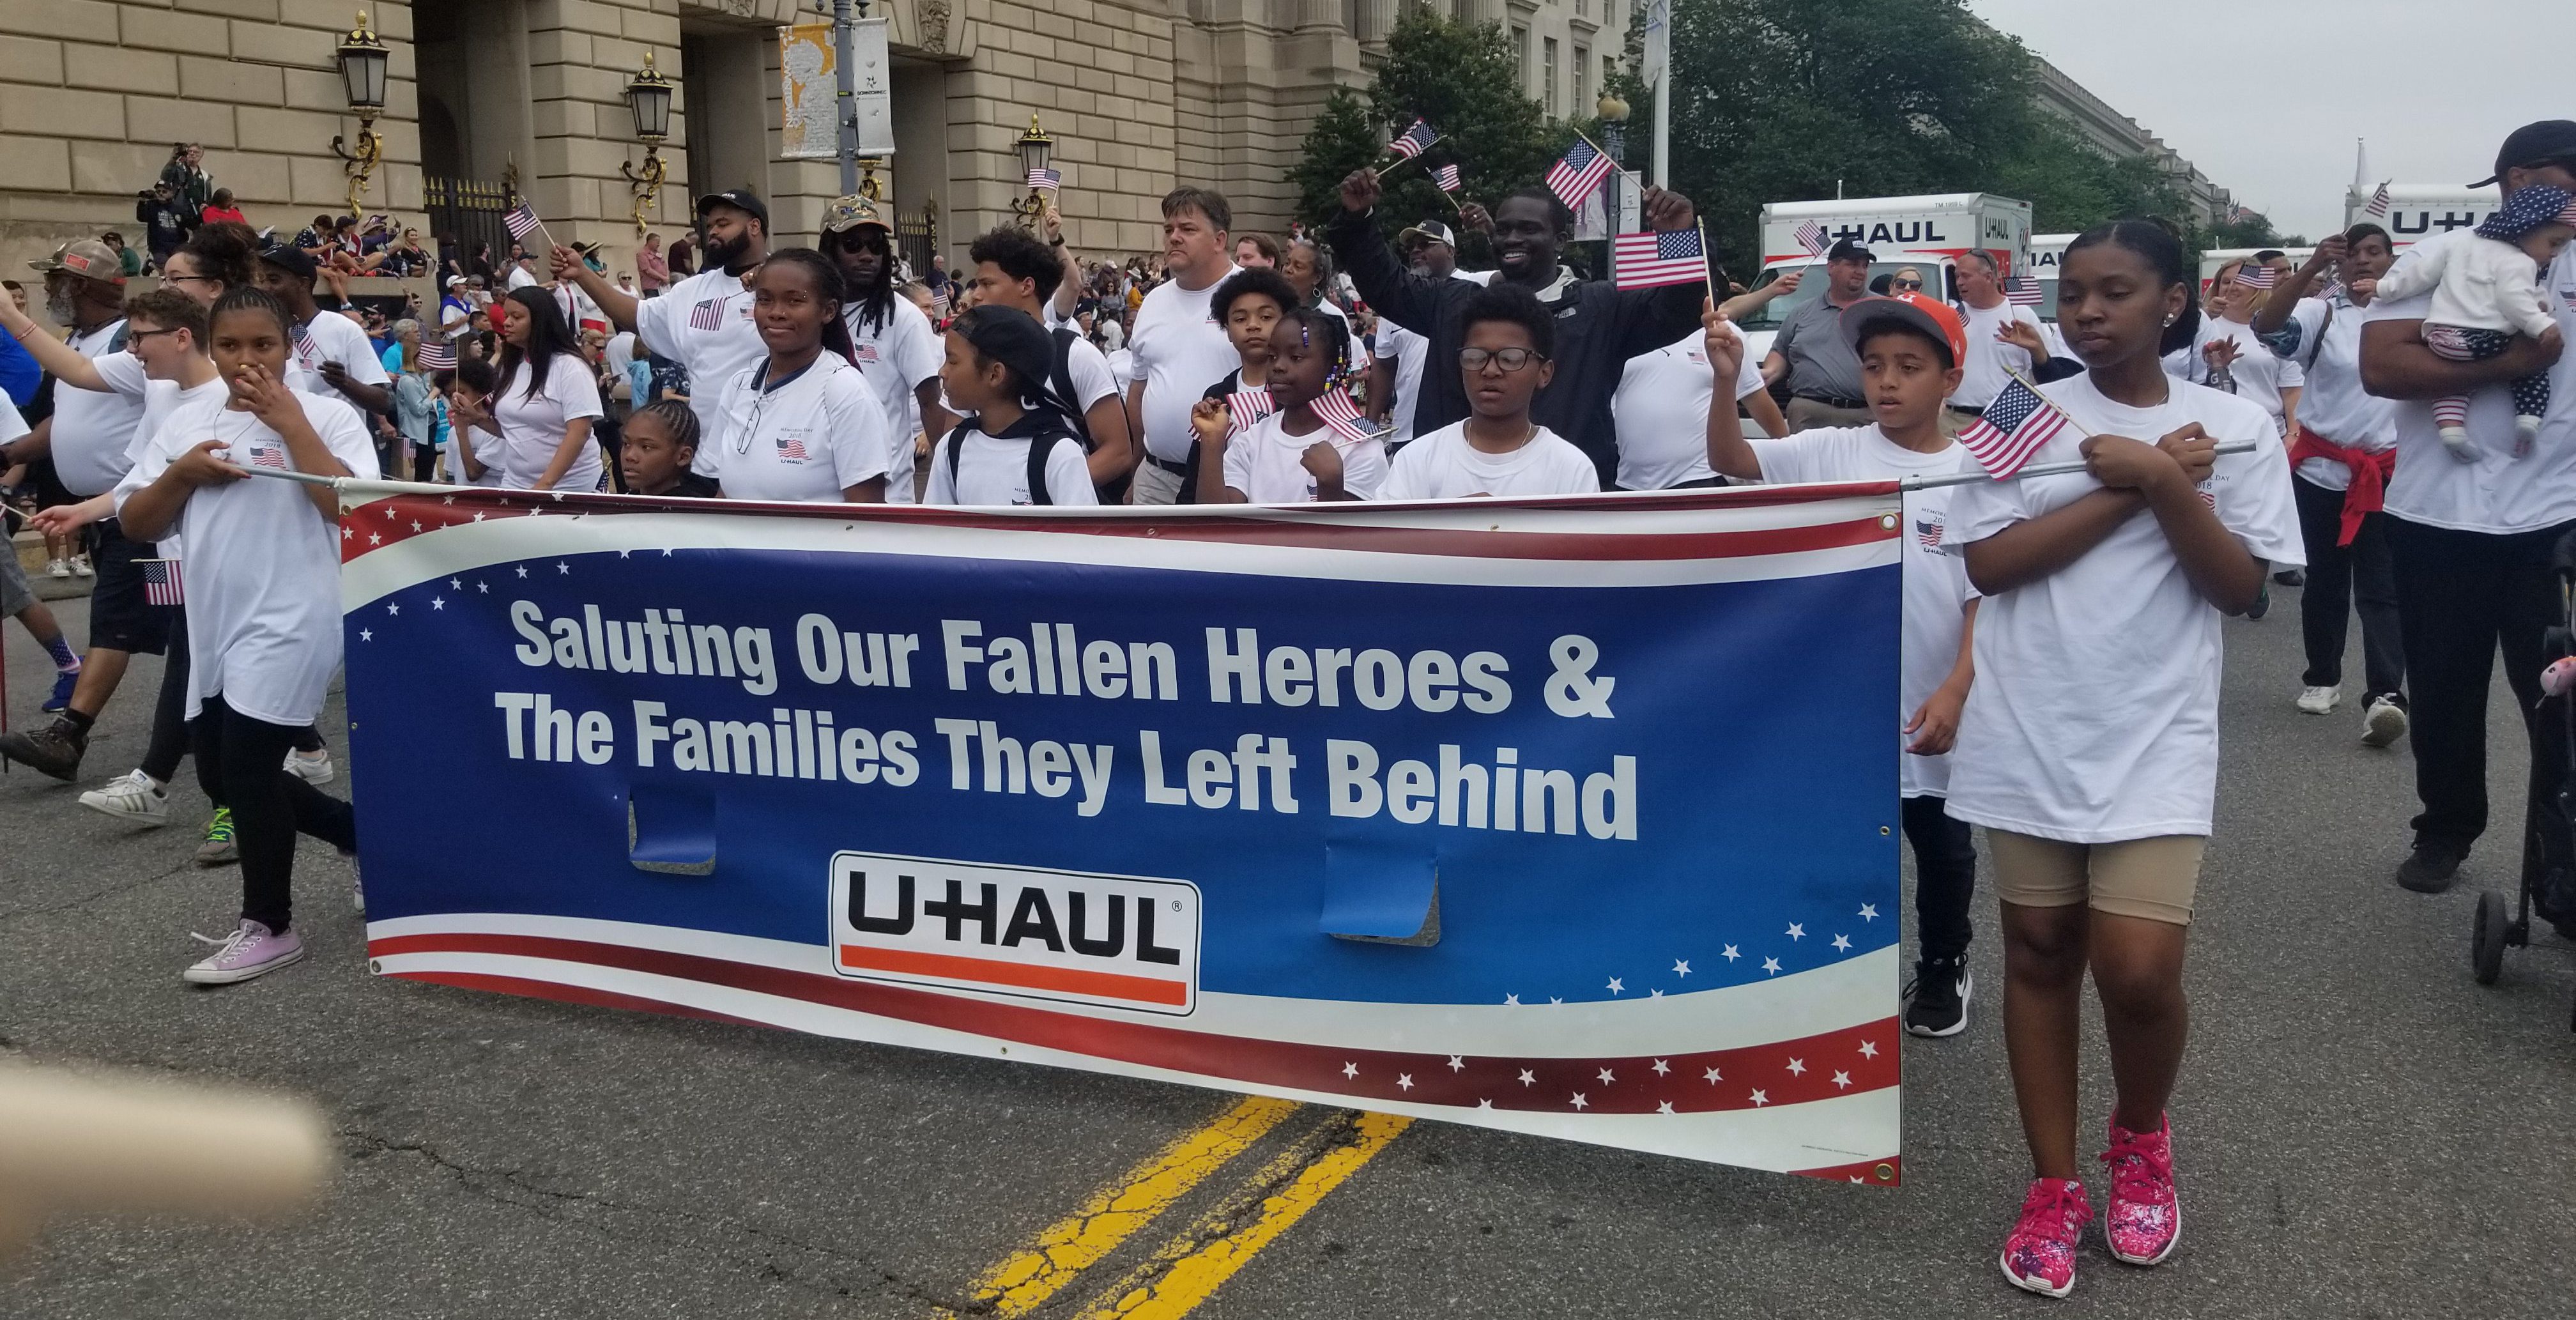 U-Haul sponsors the special broadcast of the National Memorial Day Parade, aired on May 25, 2020.